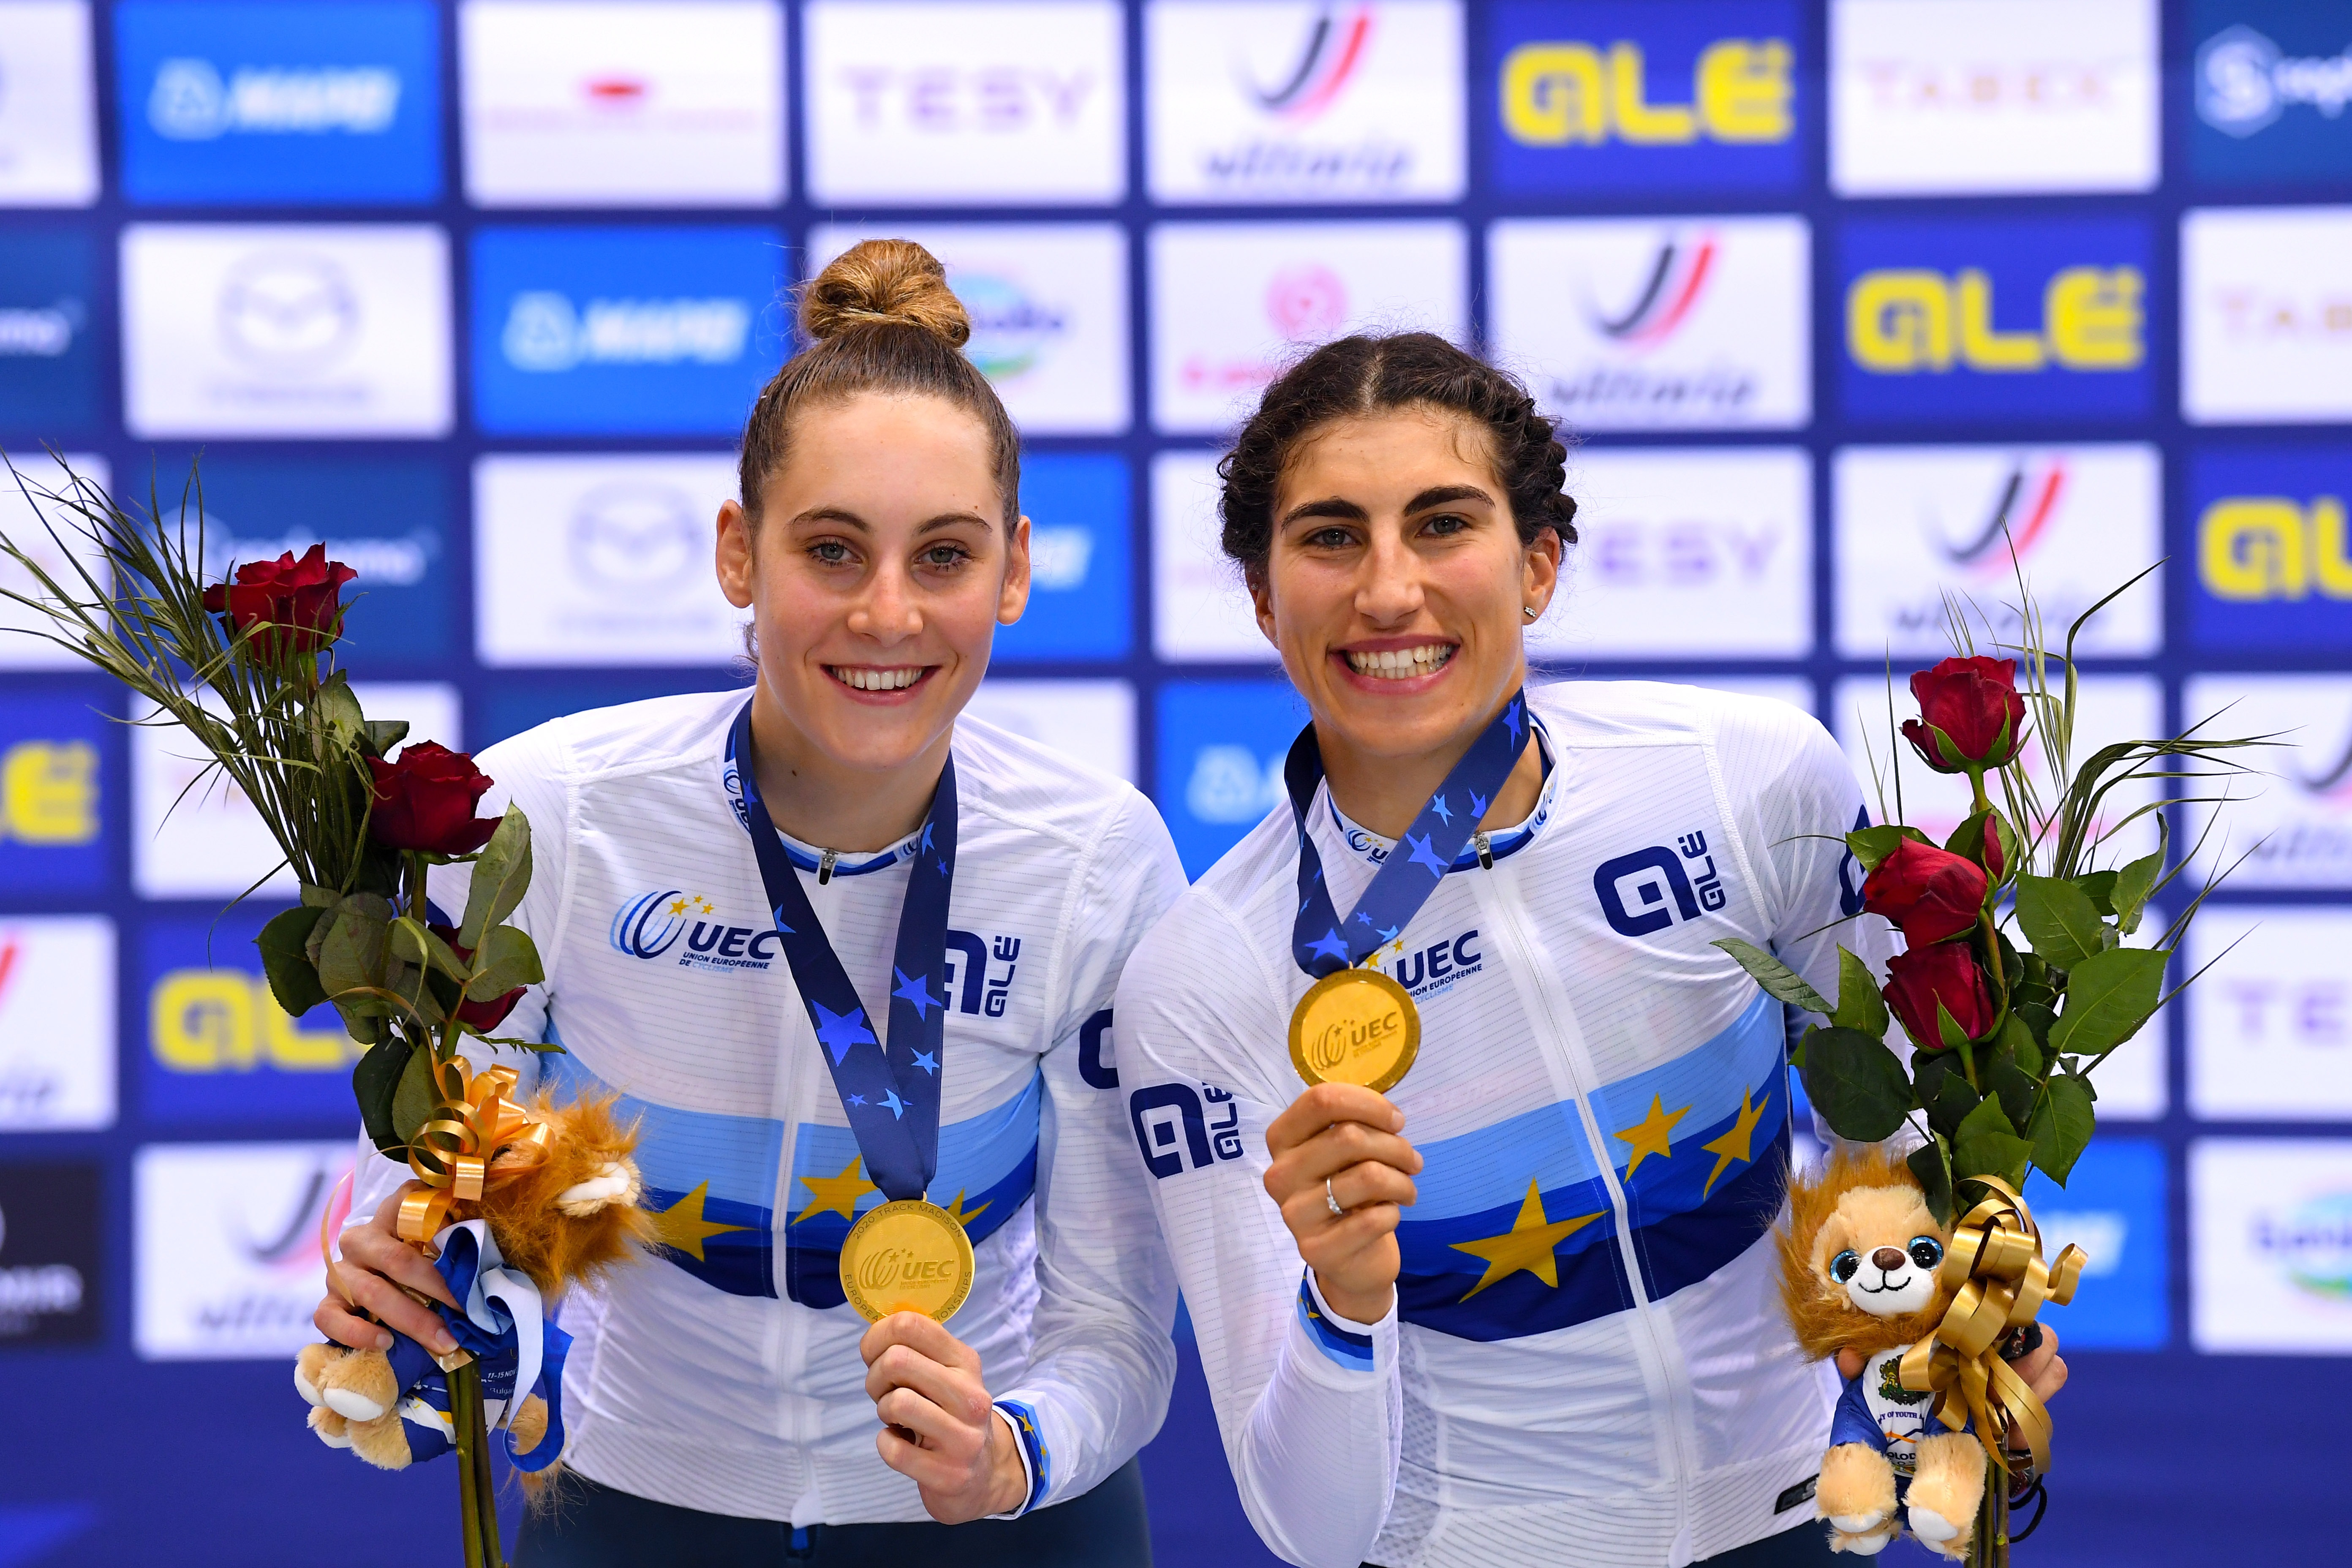 EUROTRACK 2020. BALSAMO AND GUAZZINI GIVE THE THIRD GOLD TO THE SIDI TEAM